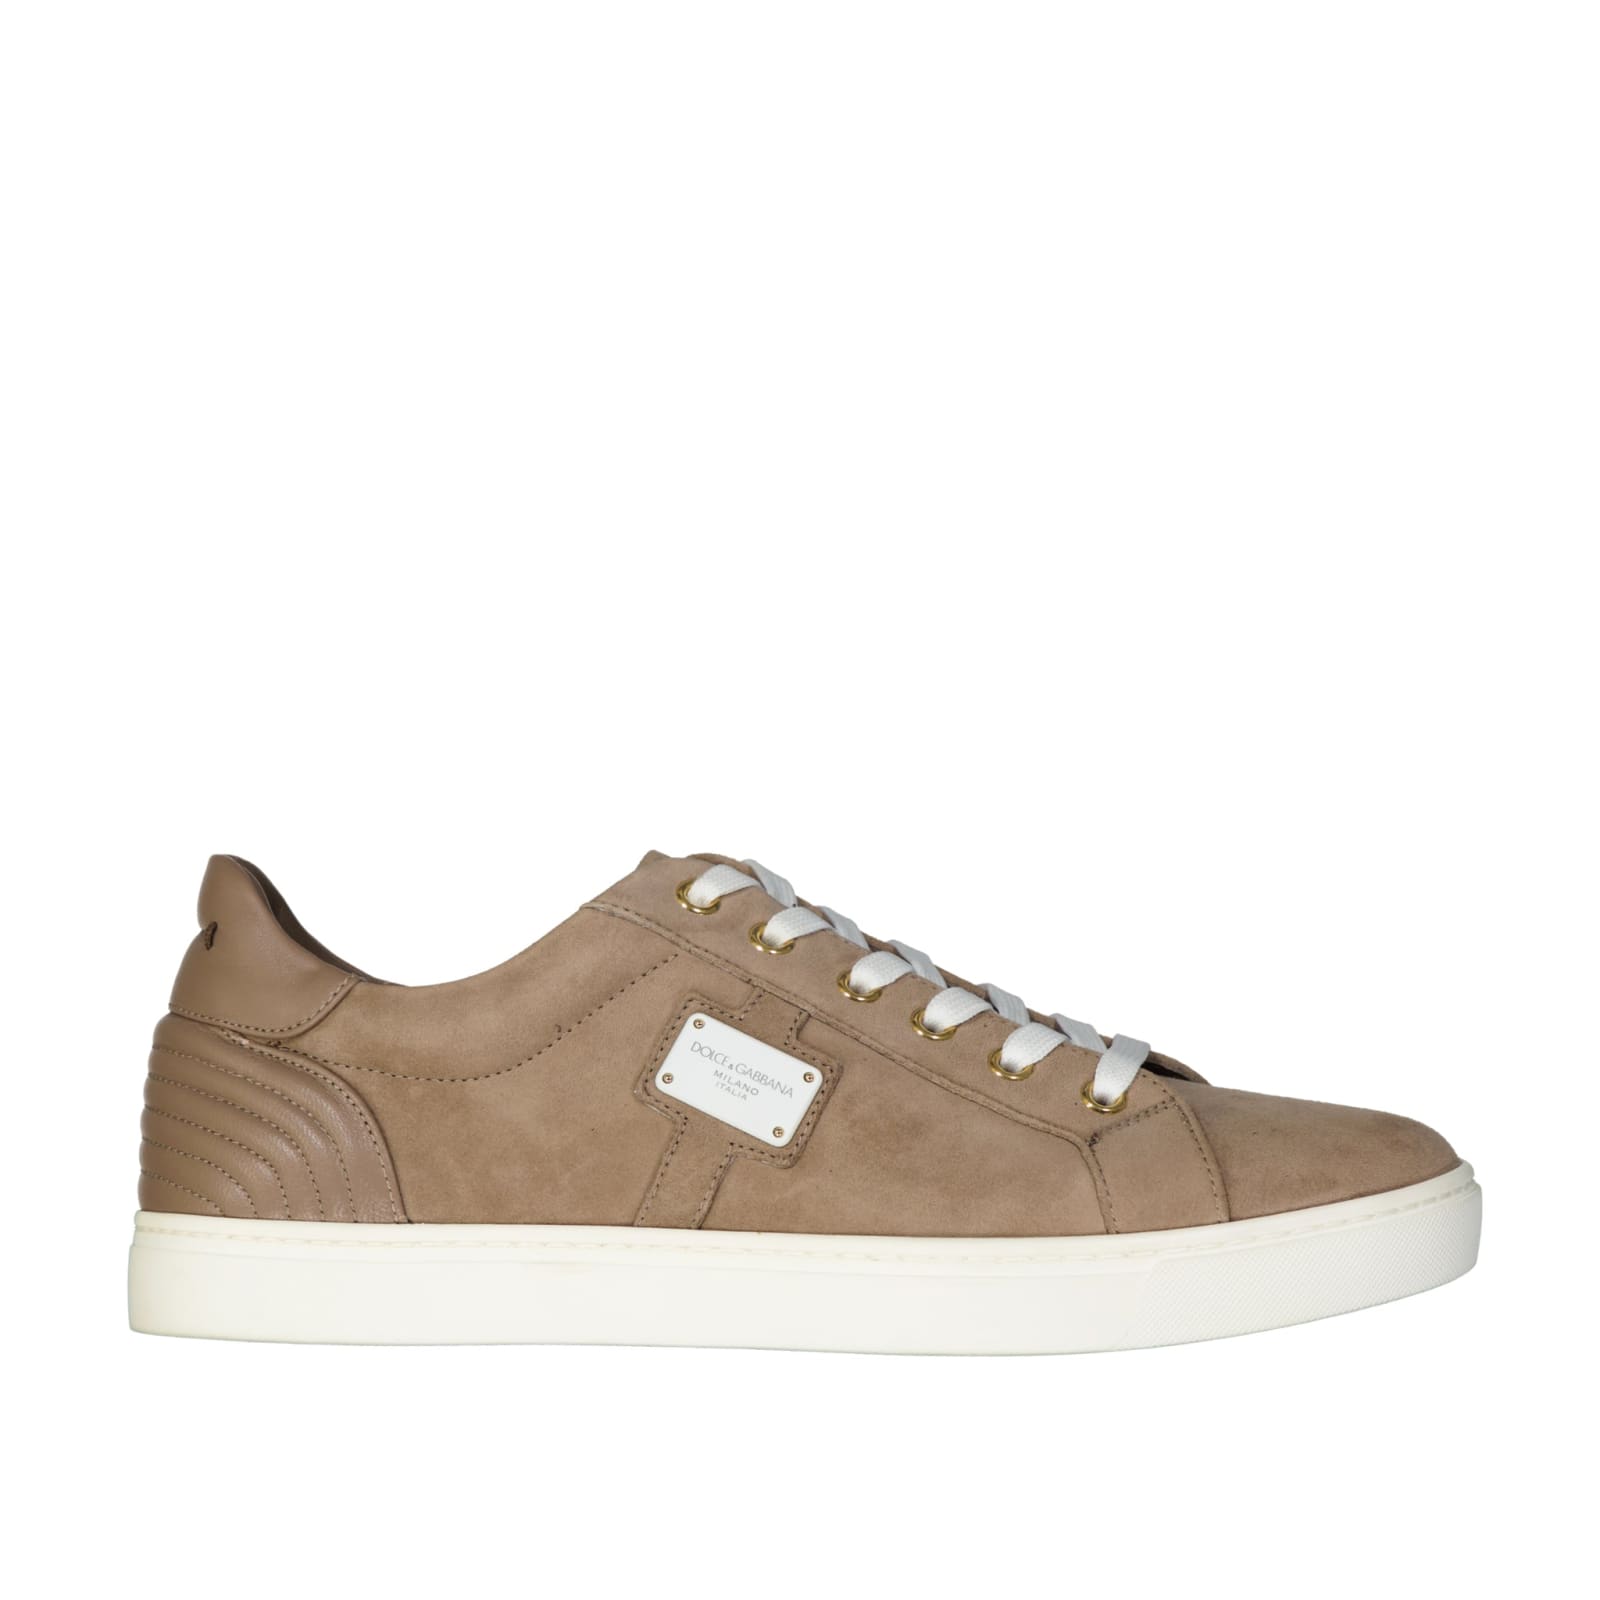 DOLCE & GABBANA SUEDE SNEAKERS